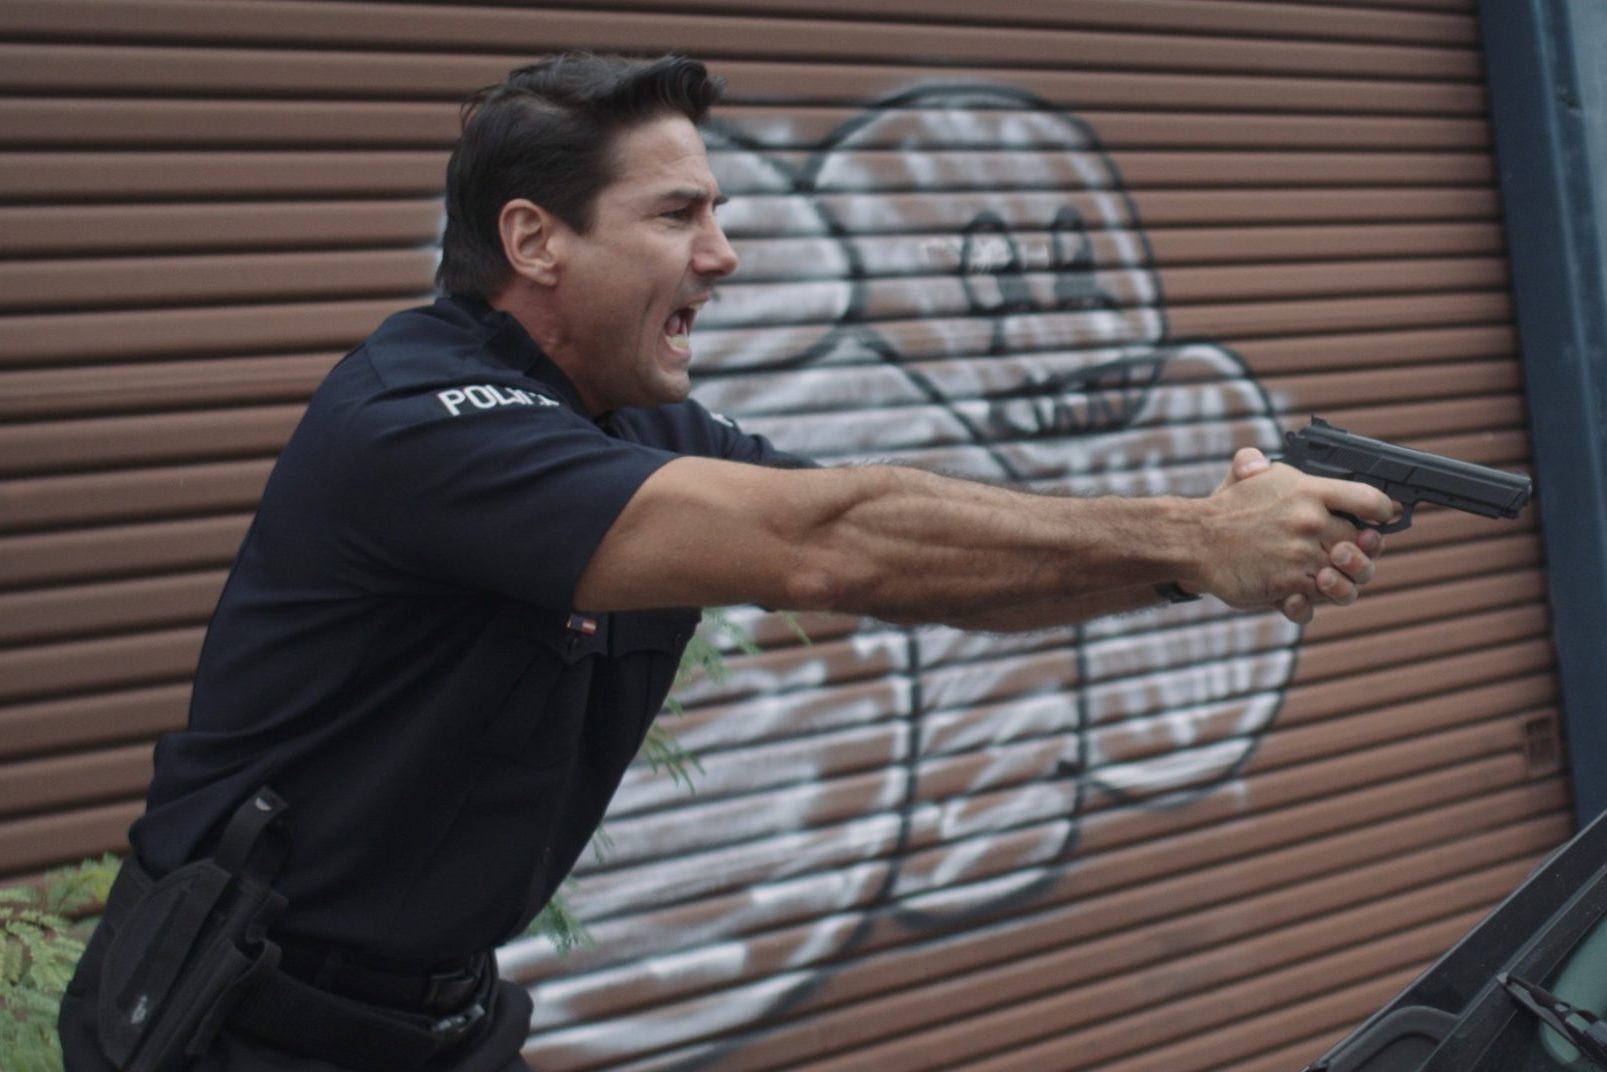 Production Resources Props Side profile of police officer wearing uniform holding a gun in outstretched hands shouting with graffiti on wall behind him